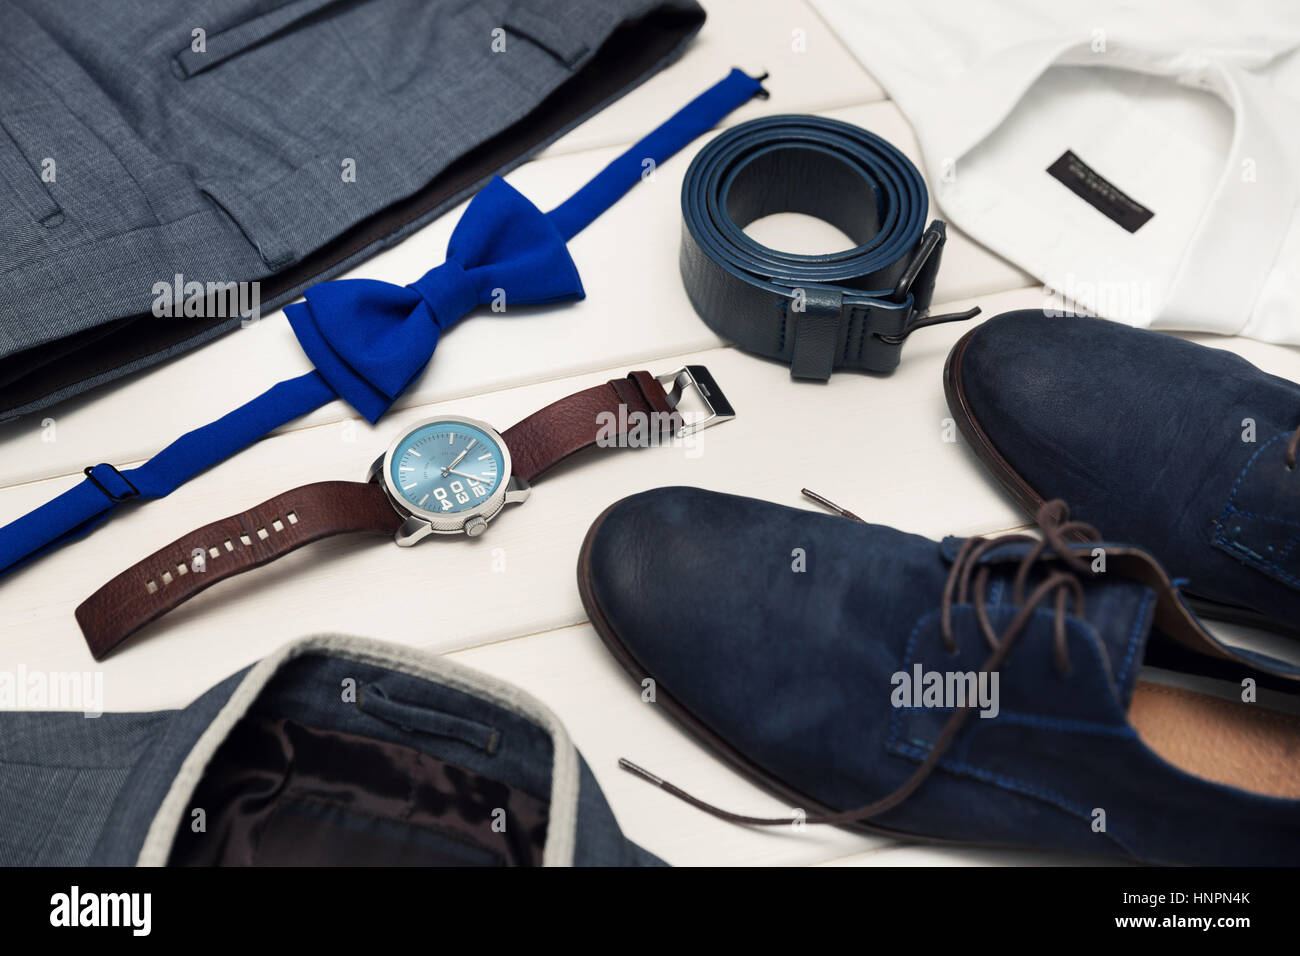 gentleman kit - men's fashion clothes and accessories Stock Photo